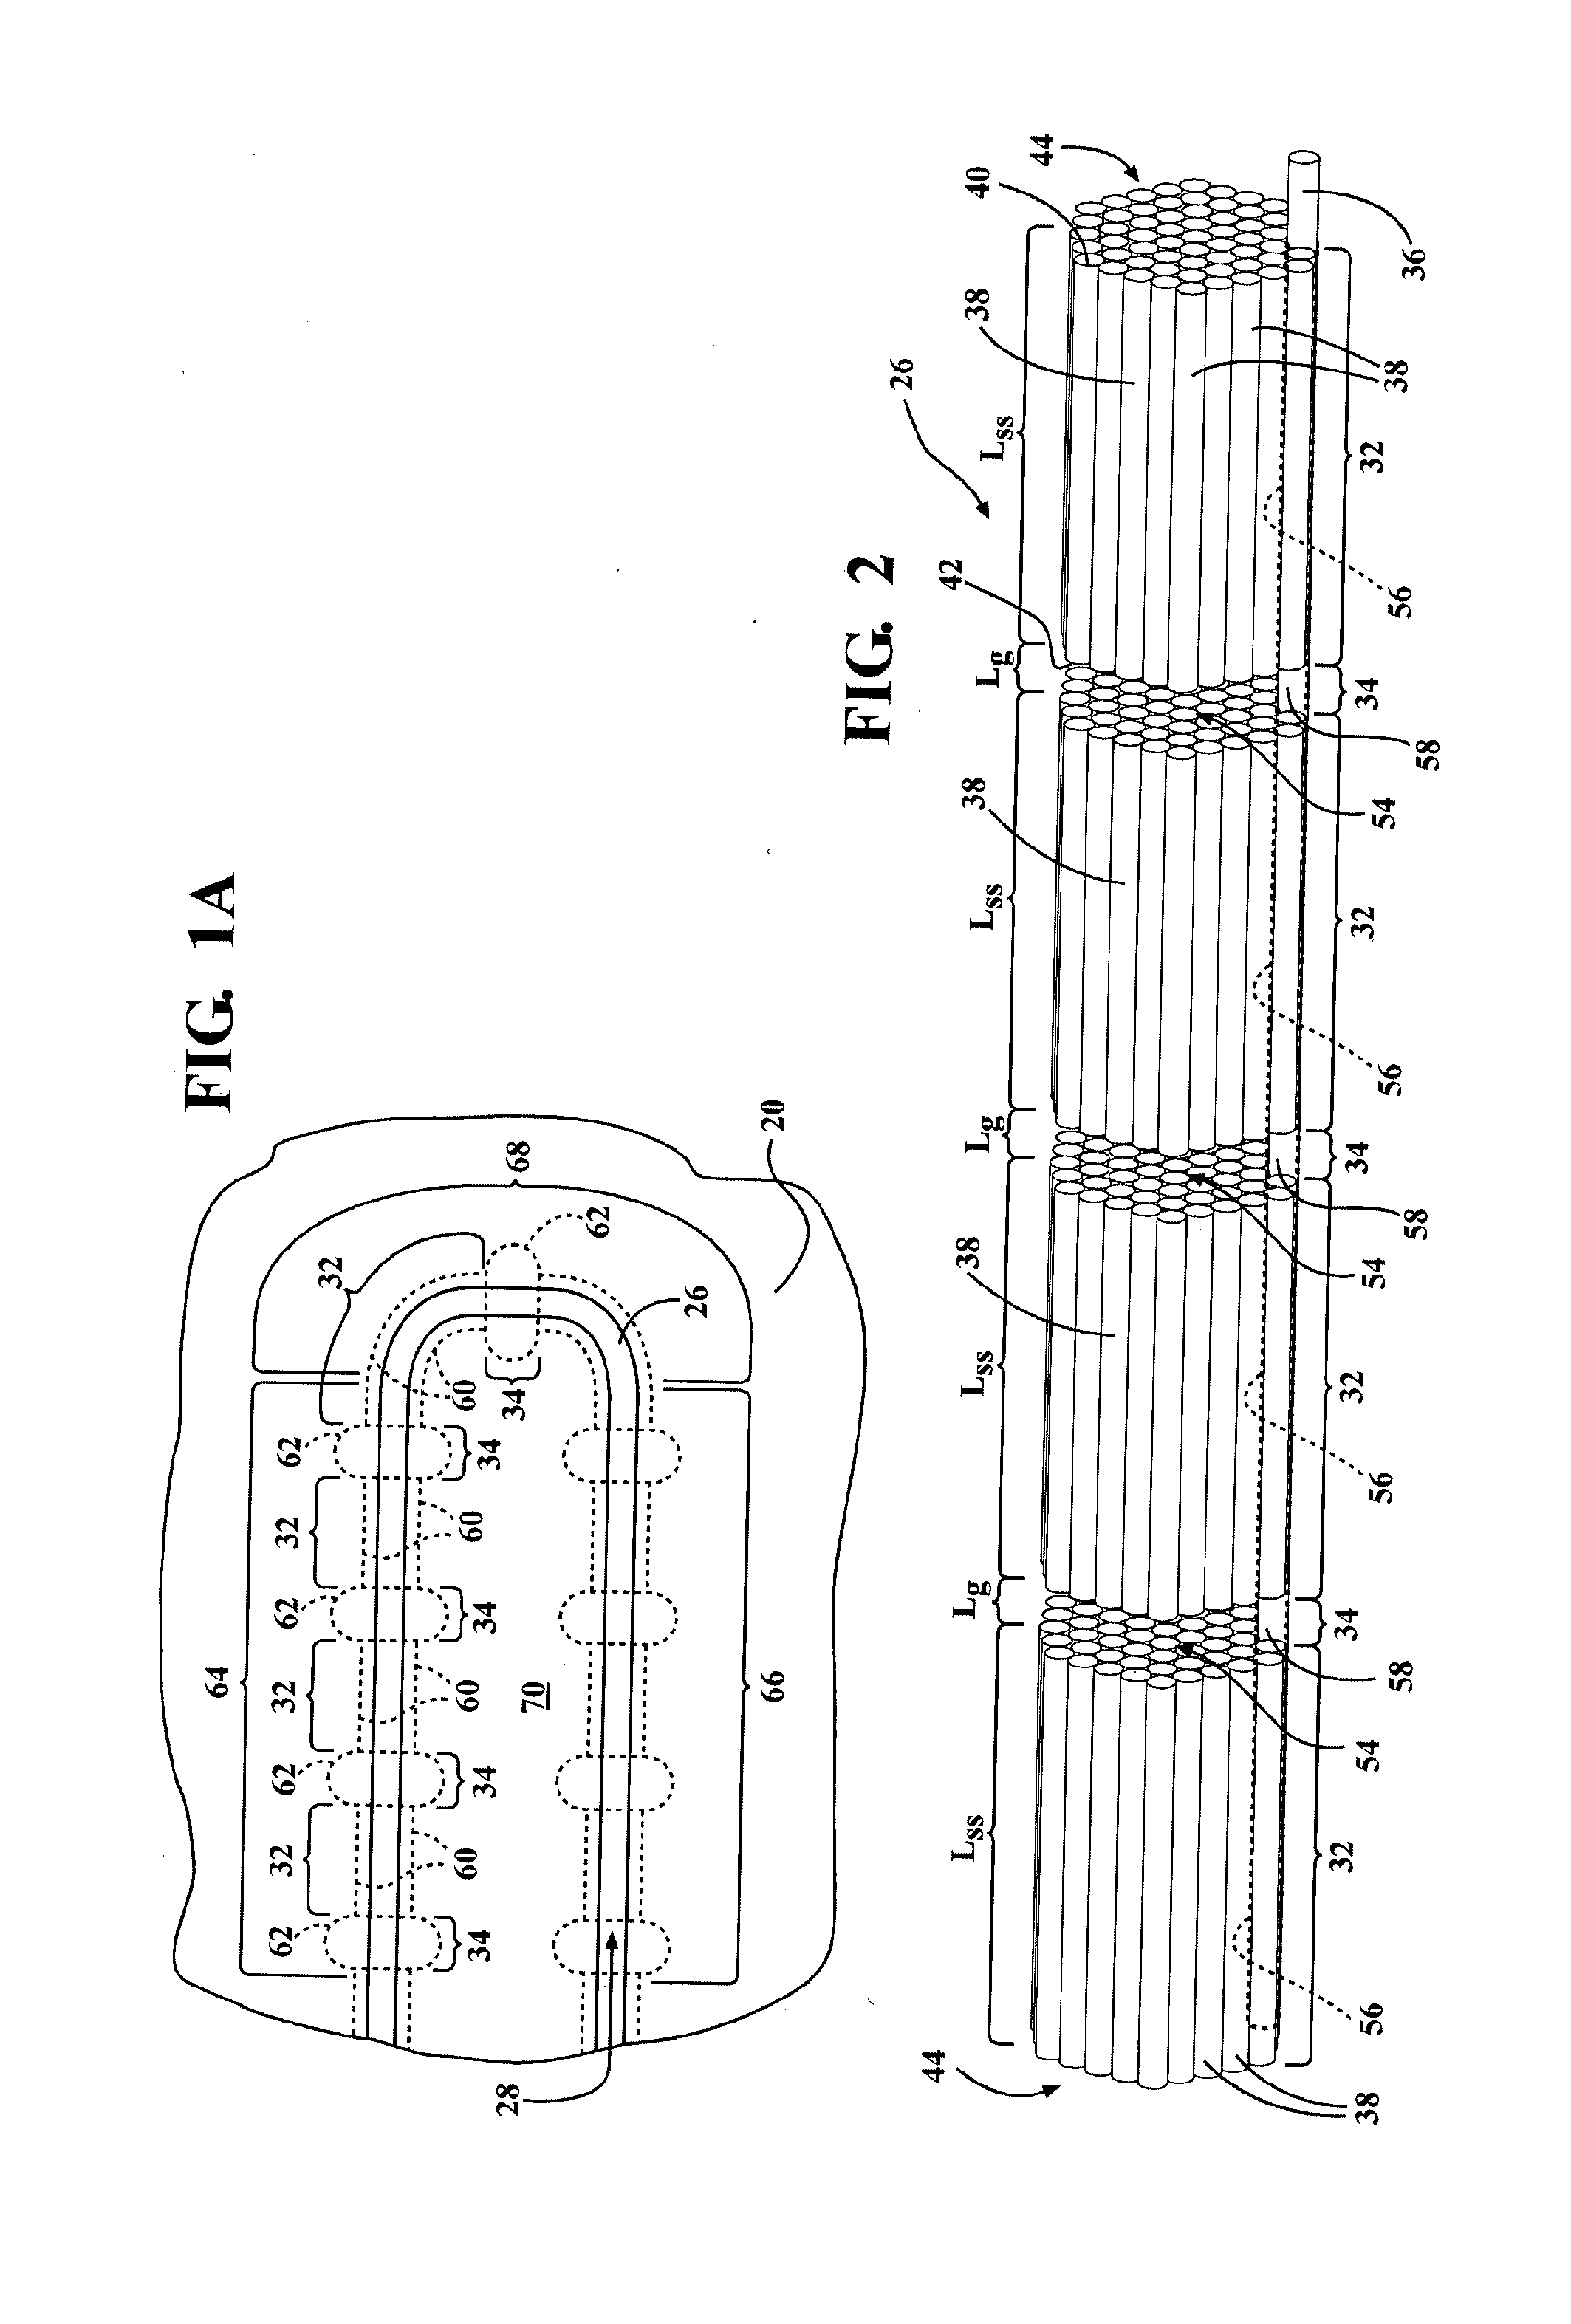 Seat assembly having heating element providing electrical heating of variable temperature along a predetermined path to a zone